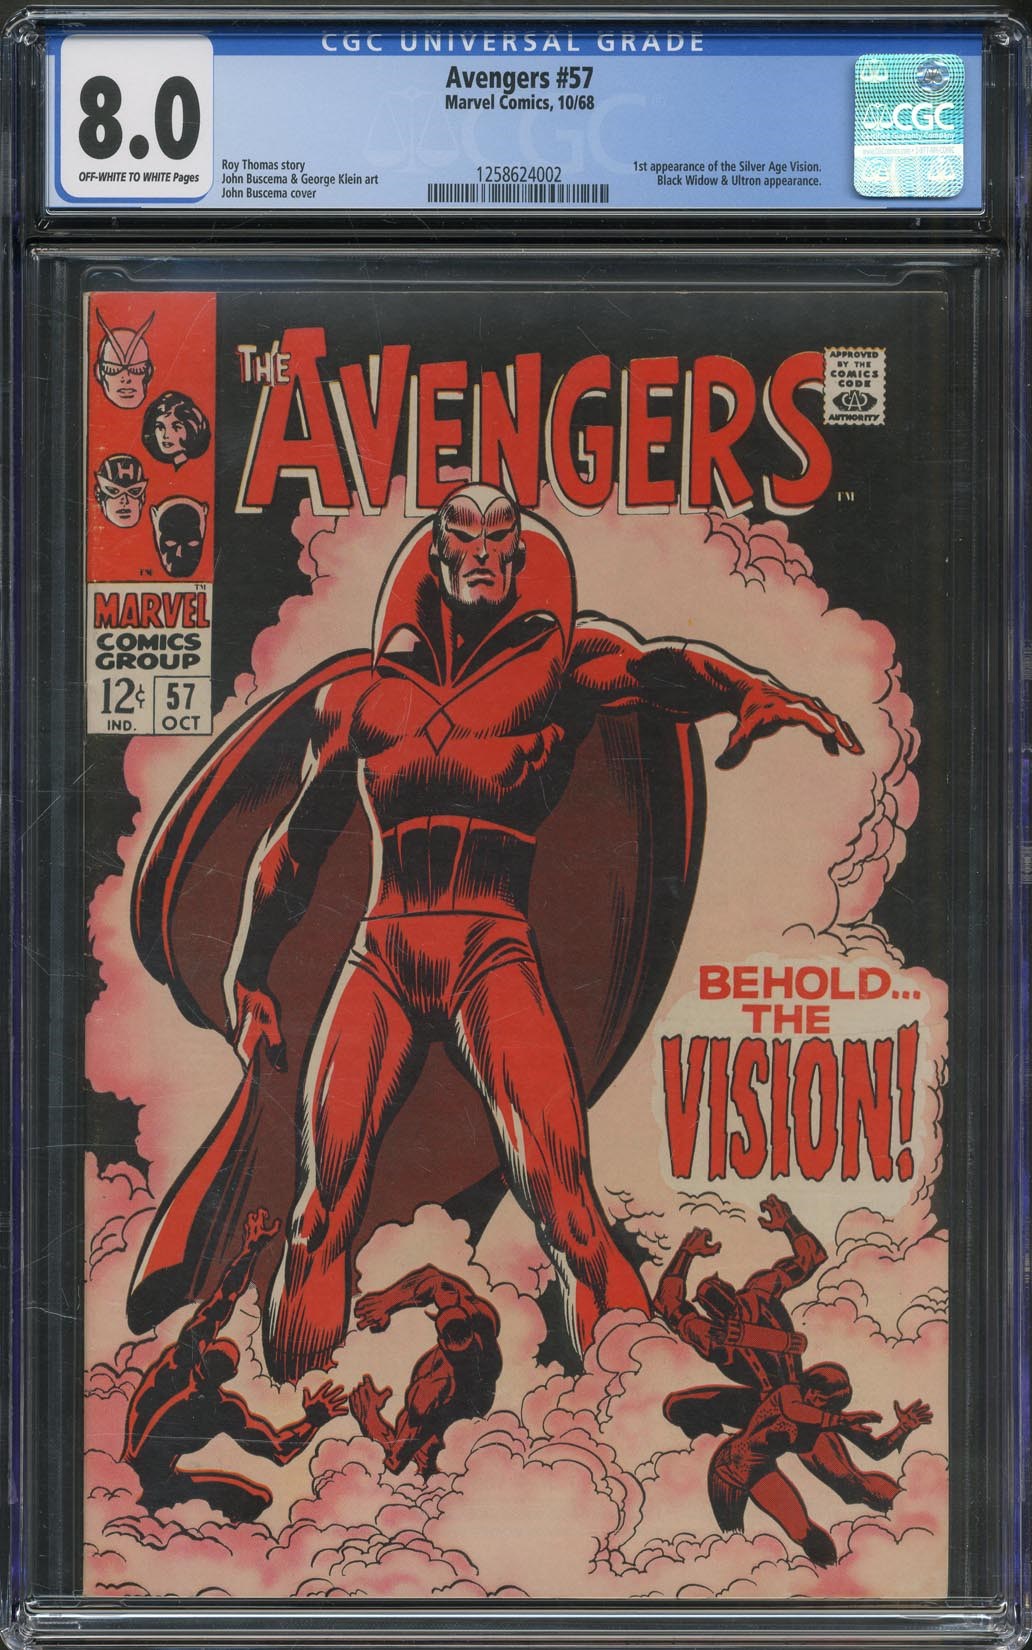 - The Avengers #57 Featuring the 1st Appearance of Vision (CGC 8.0)